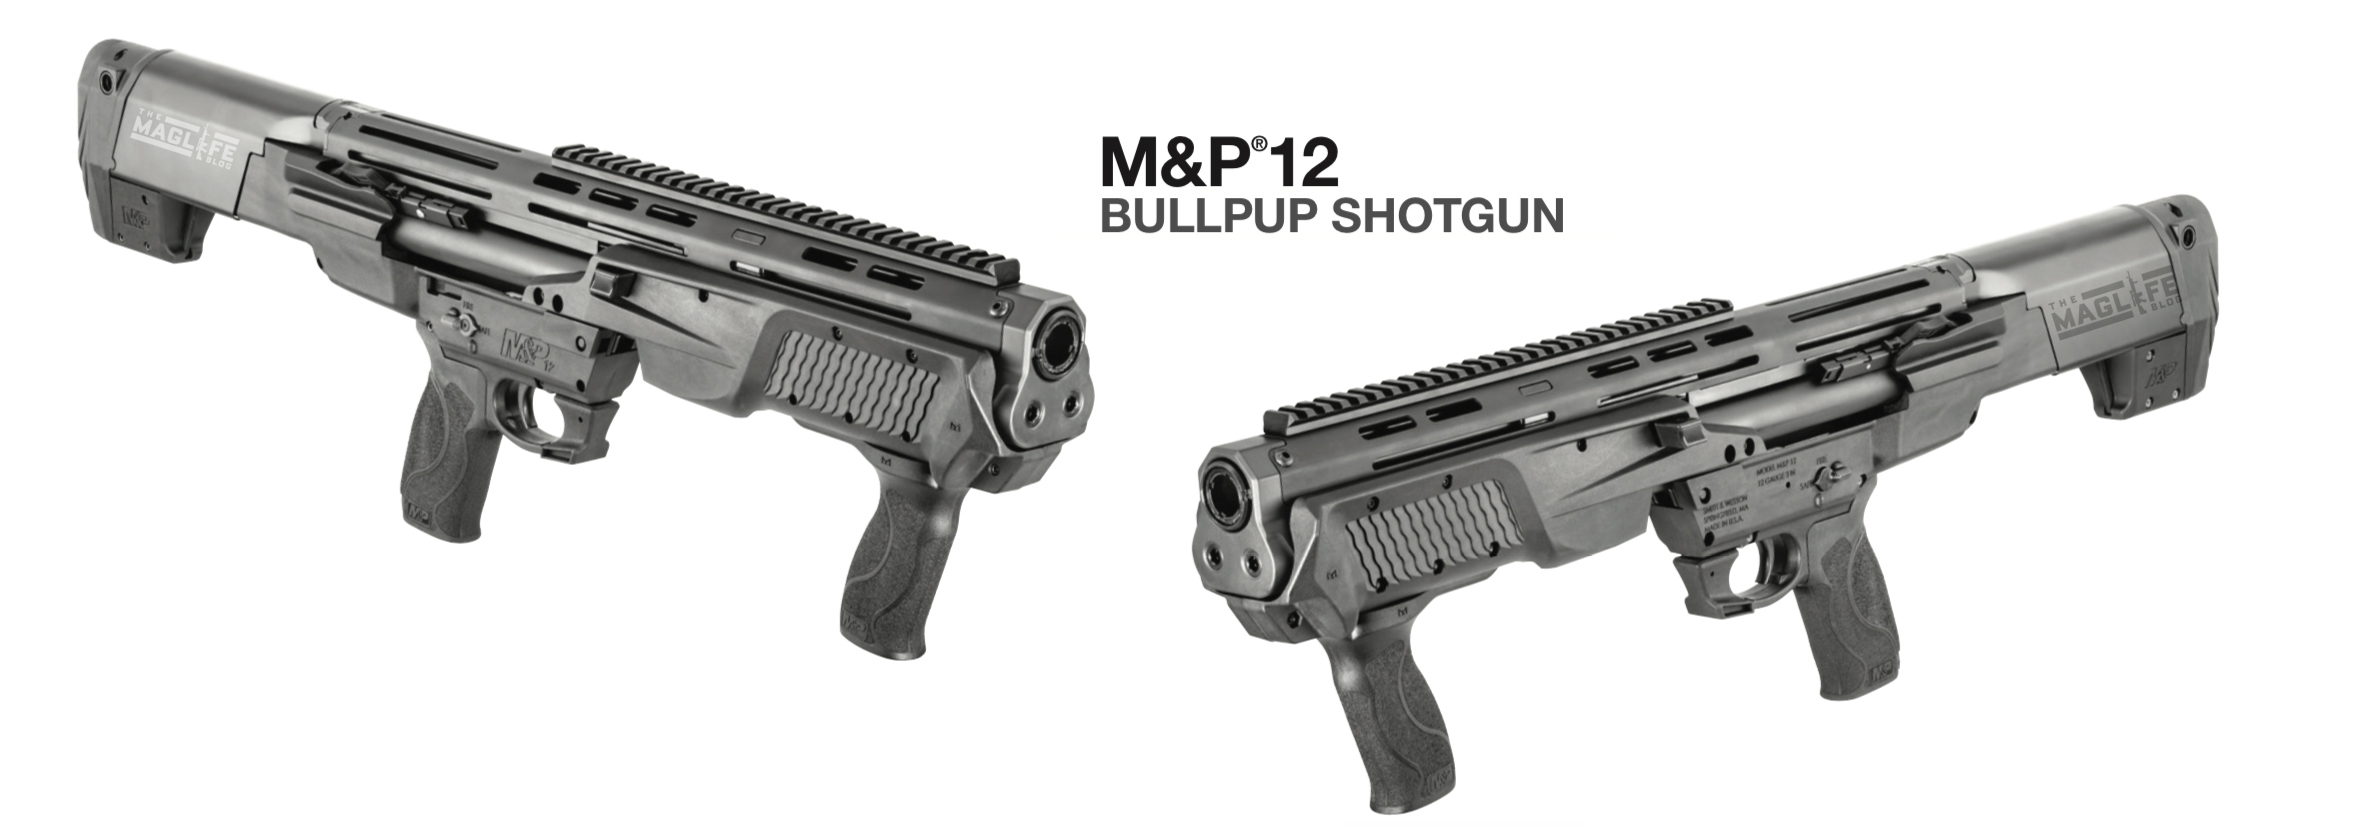 Smith and Wesson M&P bullpup shotgun